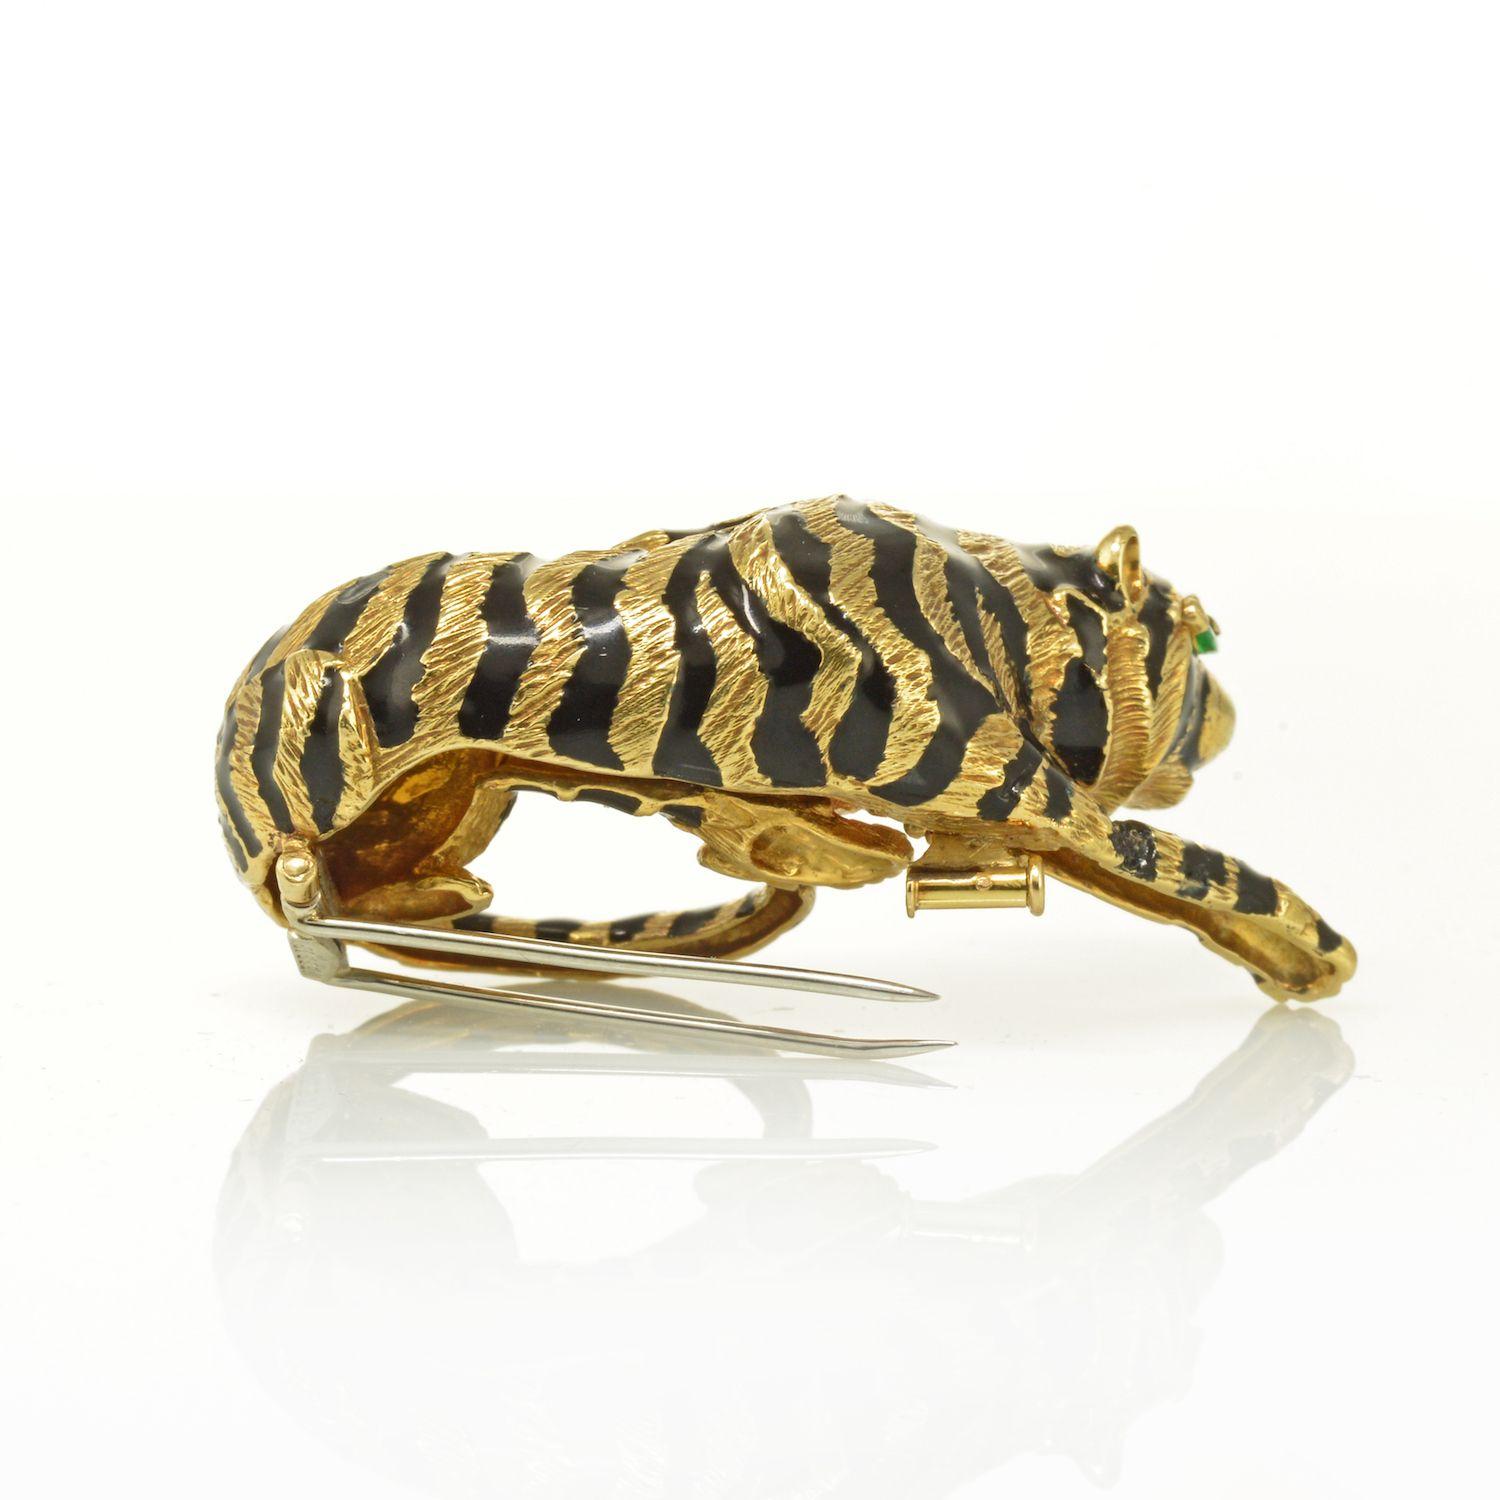 David Webb's iconic creations are hallmarked by his illustrious animal-themed jewels. This substantial brooch measures 2.5 by 1.25 inches and offers an exceptional rendering of a tiger, his golden fur textured with masterful skill and his glossy